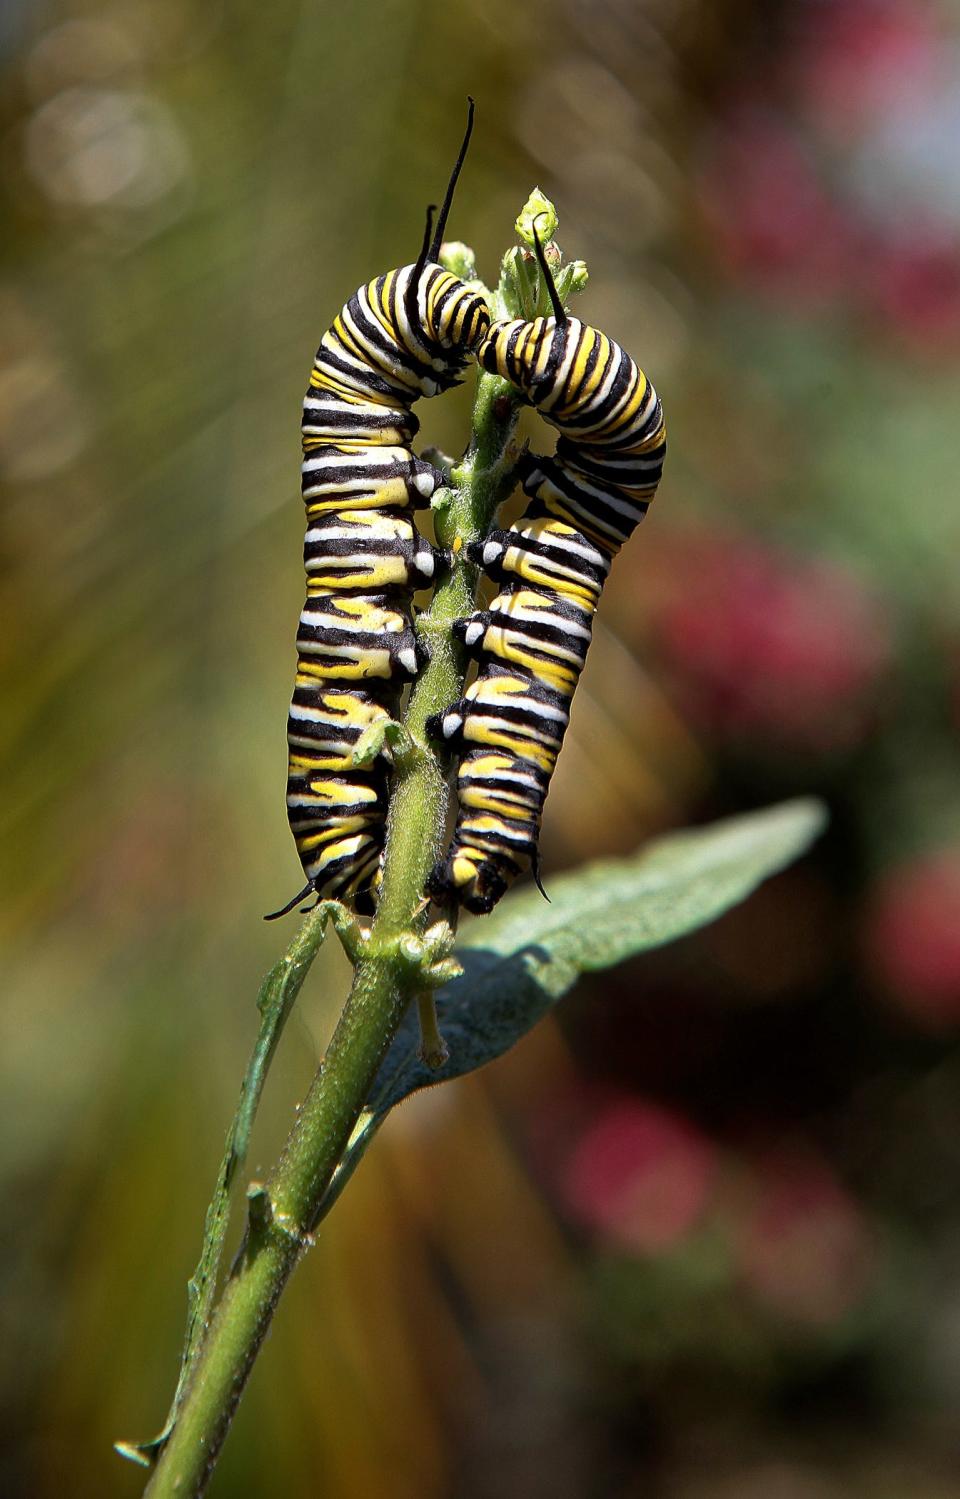 Monarch caterpillars munch on the leaves of a milkweed plant in West Palm Beach, Florida on April, 2012.